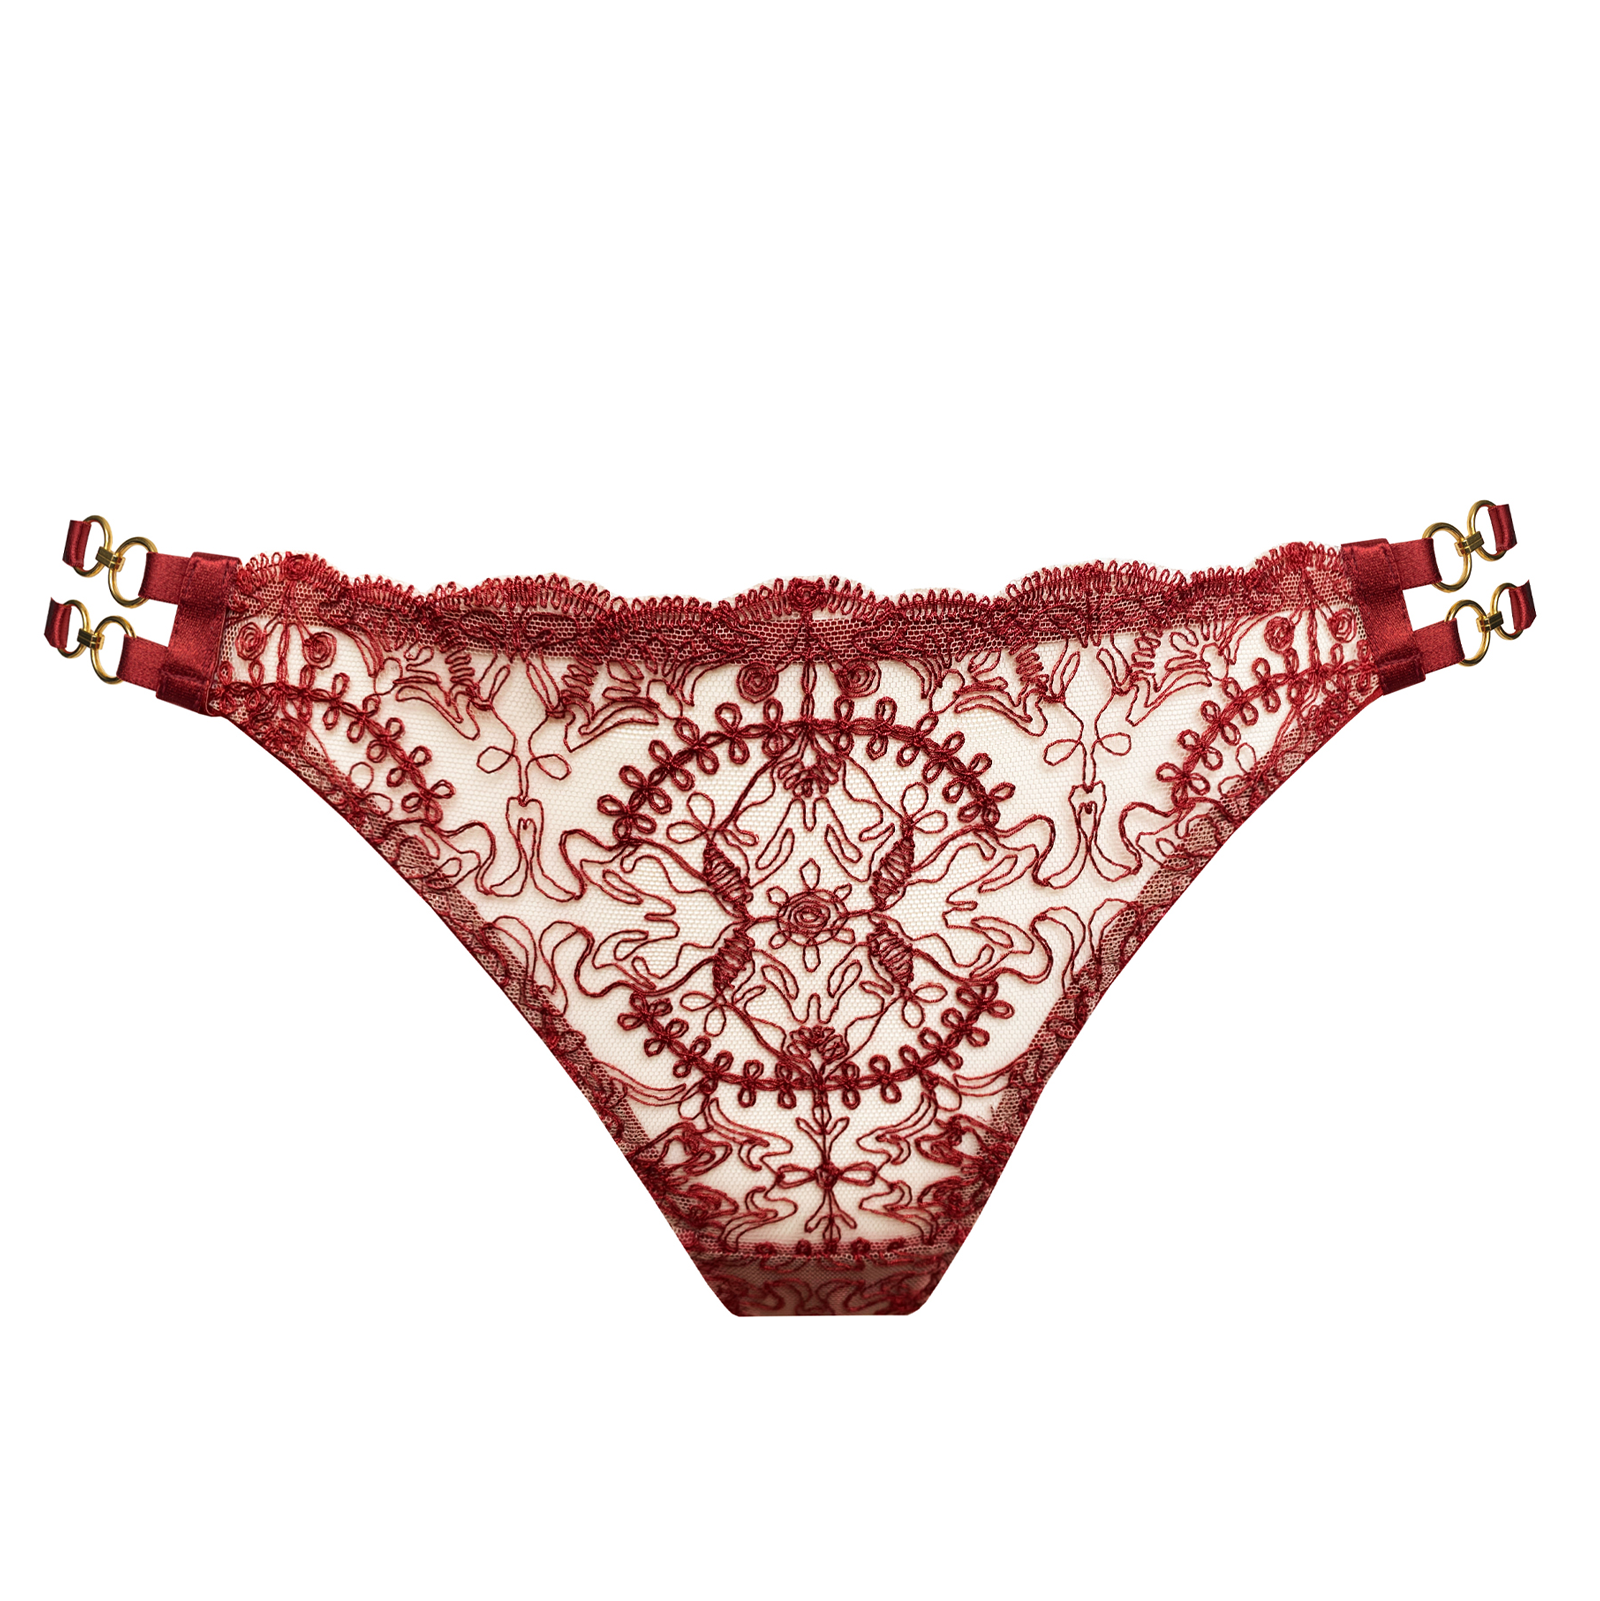 Cymatic thong by Bordelle - red